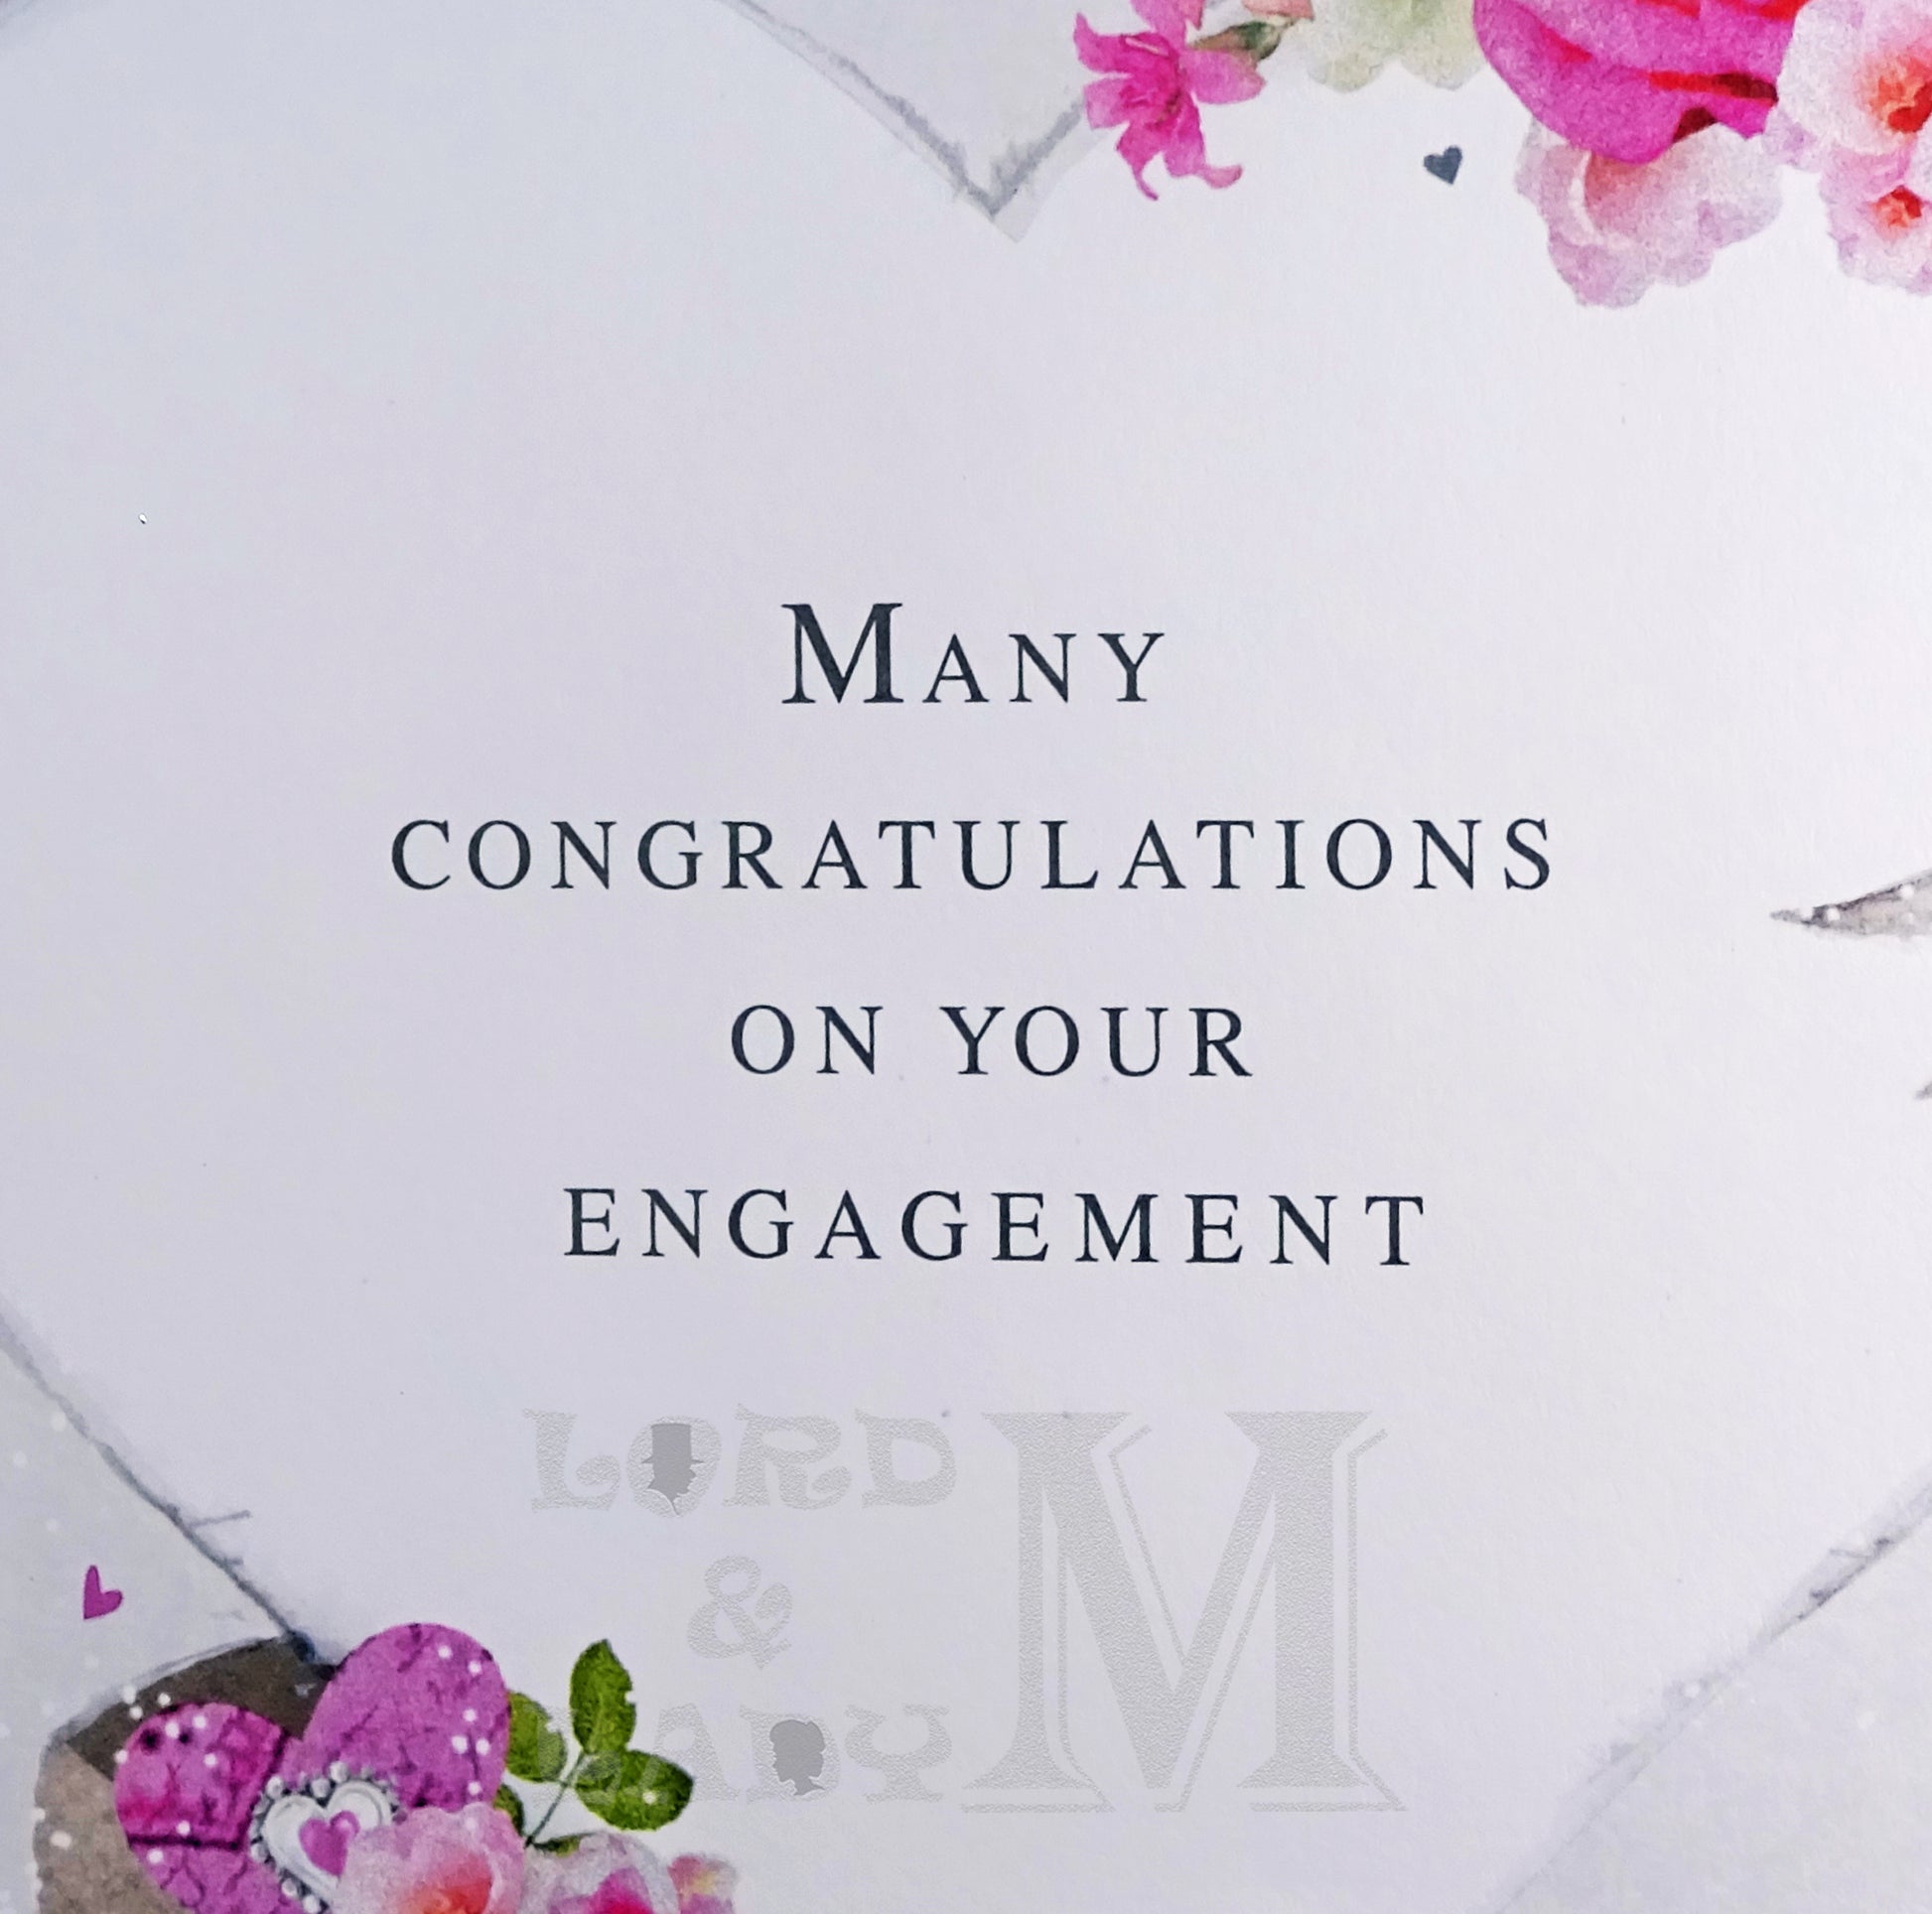 23cm - On Your Engagement With Best Wishes - CWH